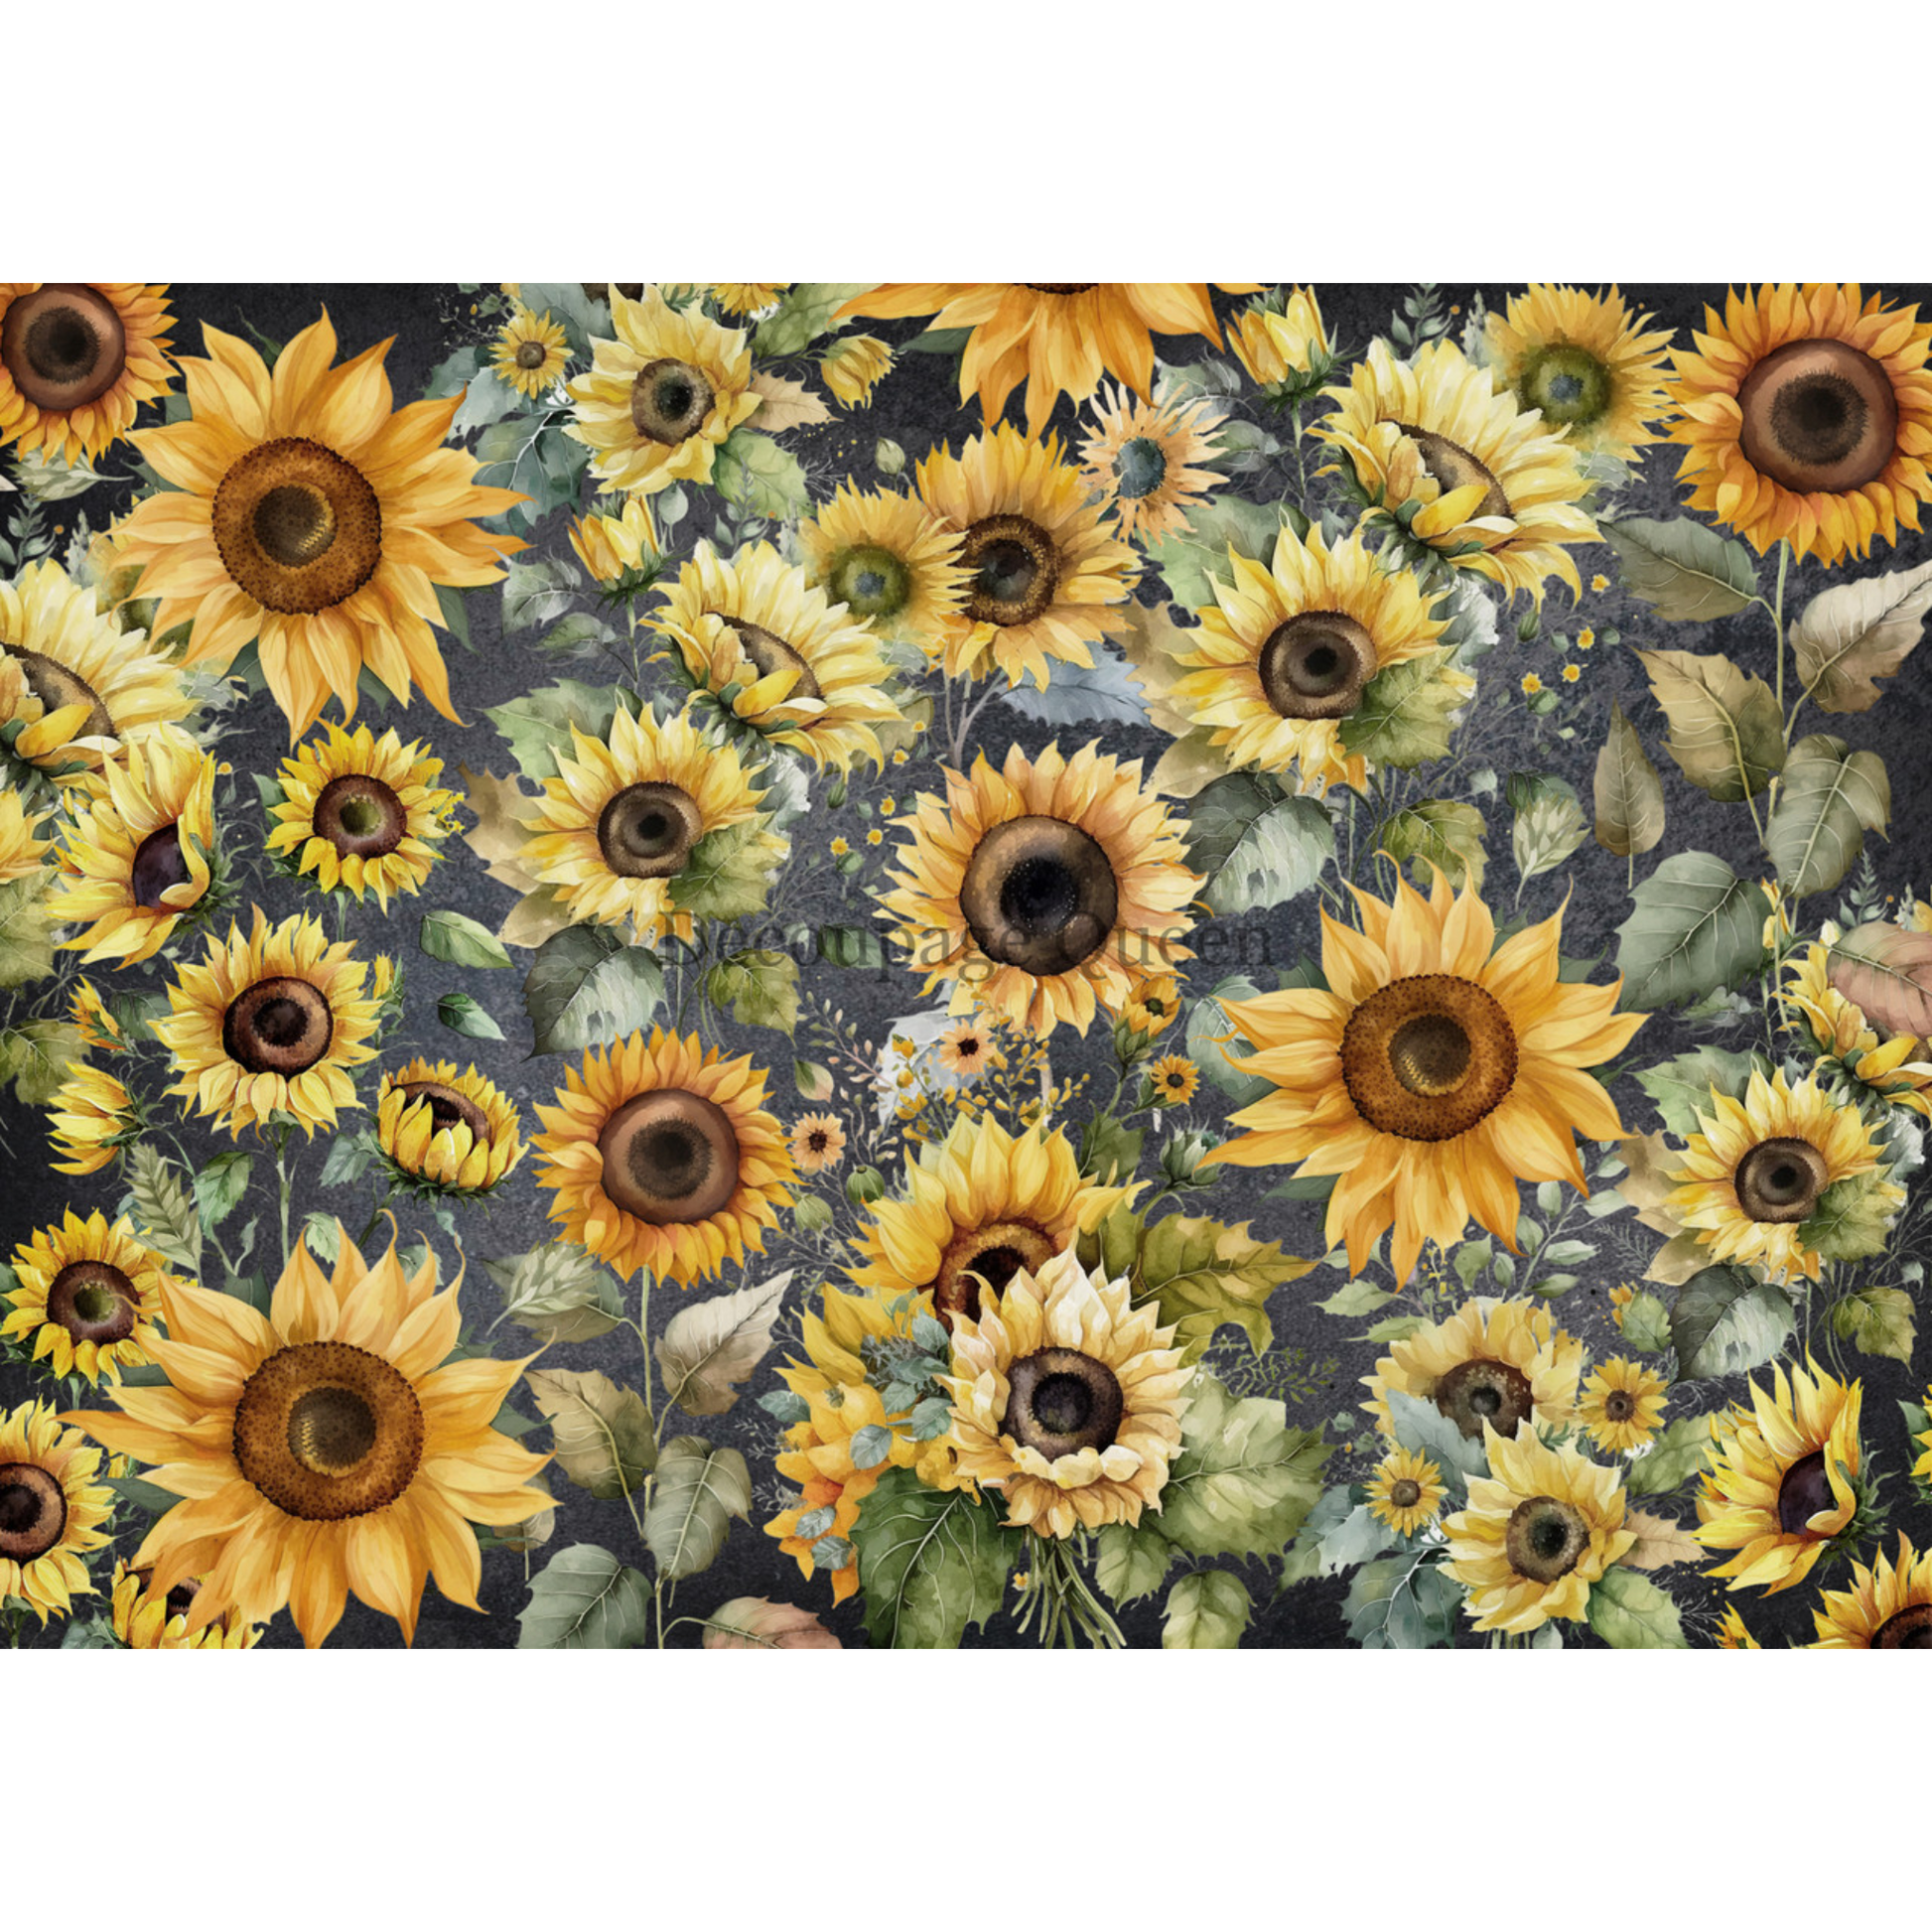 "Field of Sunflowers" decoupage rice paper by Decoupage Queen. Avaialble at Milton's Daughter.